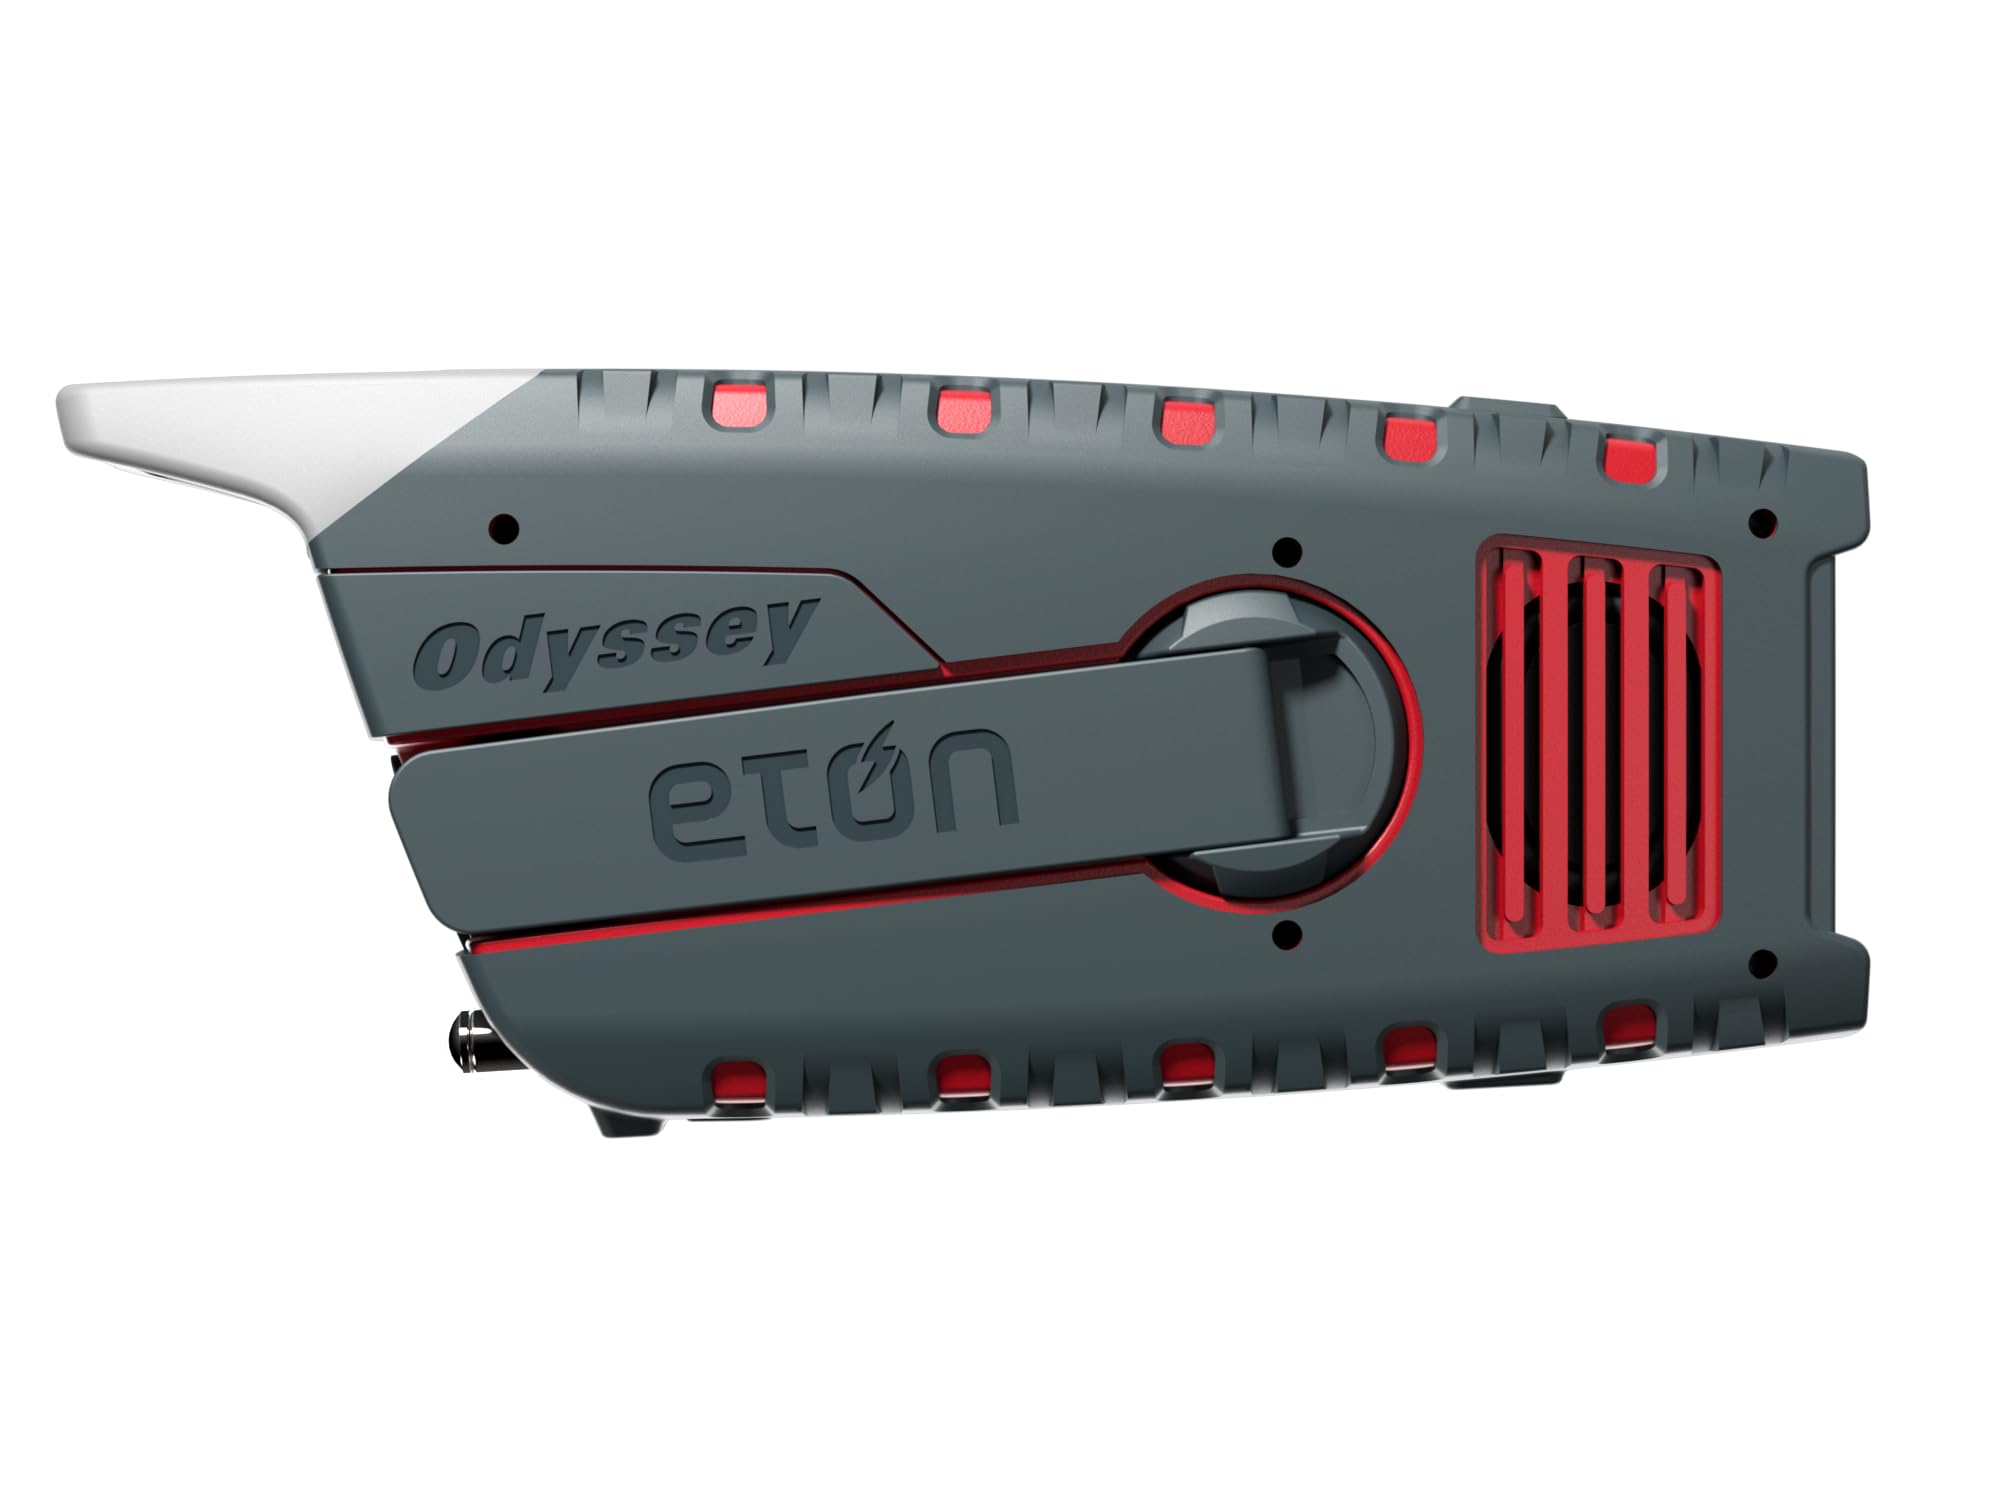 Eton Adventure Series Odyssey- Multi-Powered All-Band Radio (AM/FM/NOAA/Shortwave) with Bluetooth, Solar Powered, Battery Powered, LED Flashlight, Phone Charger, Commitment to Preparedness